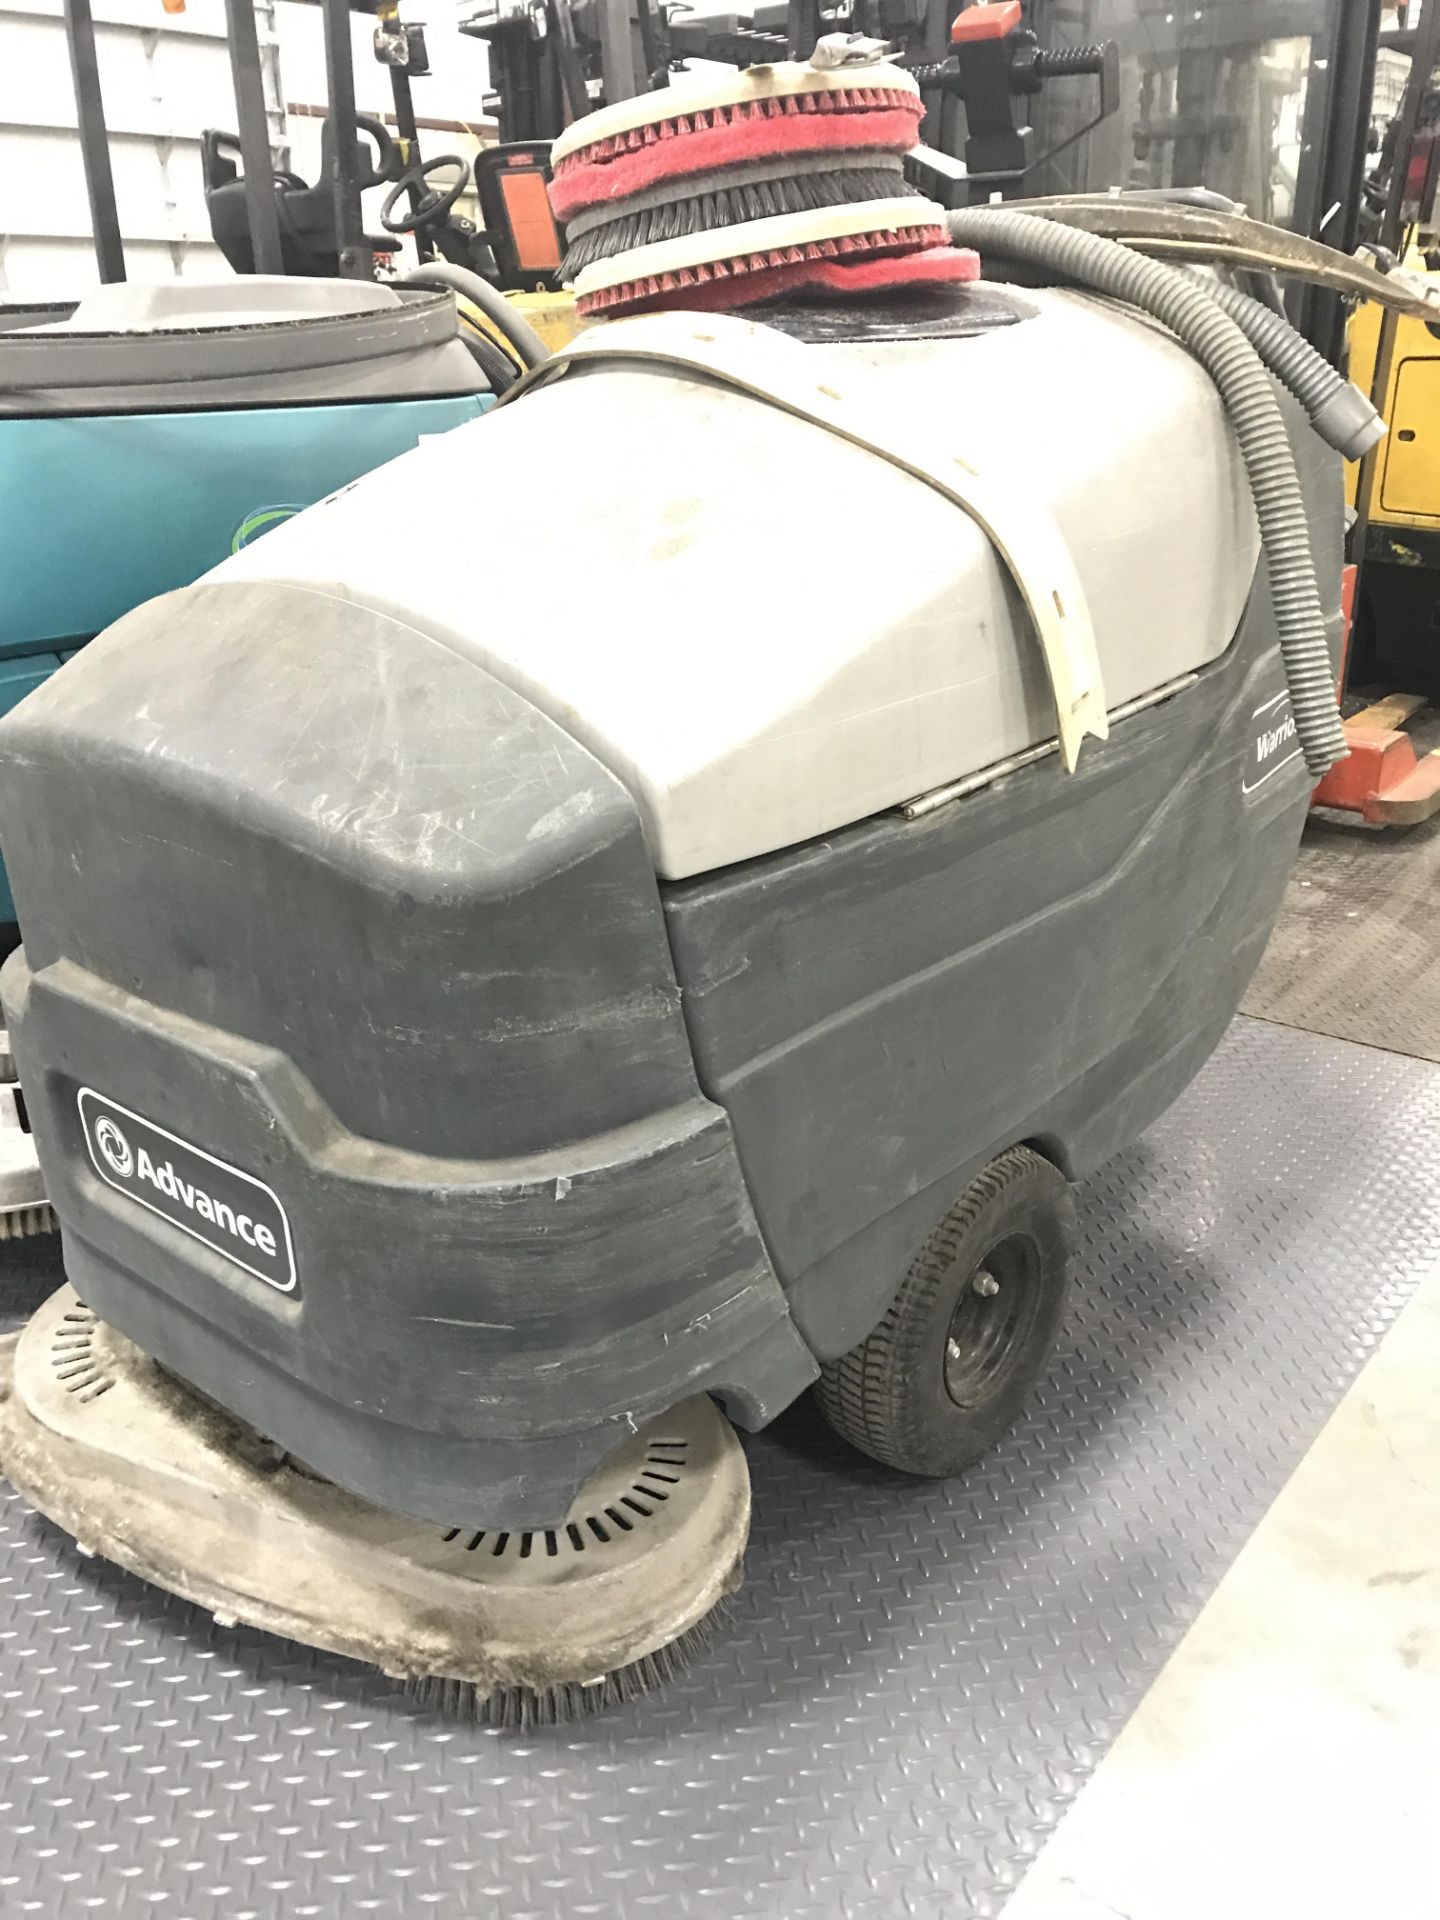 TENNANT ADVANCE WARRIOR ST. FLOOR SWEEPER/SCRUBBER, 623.1 HOURS SHOWING